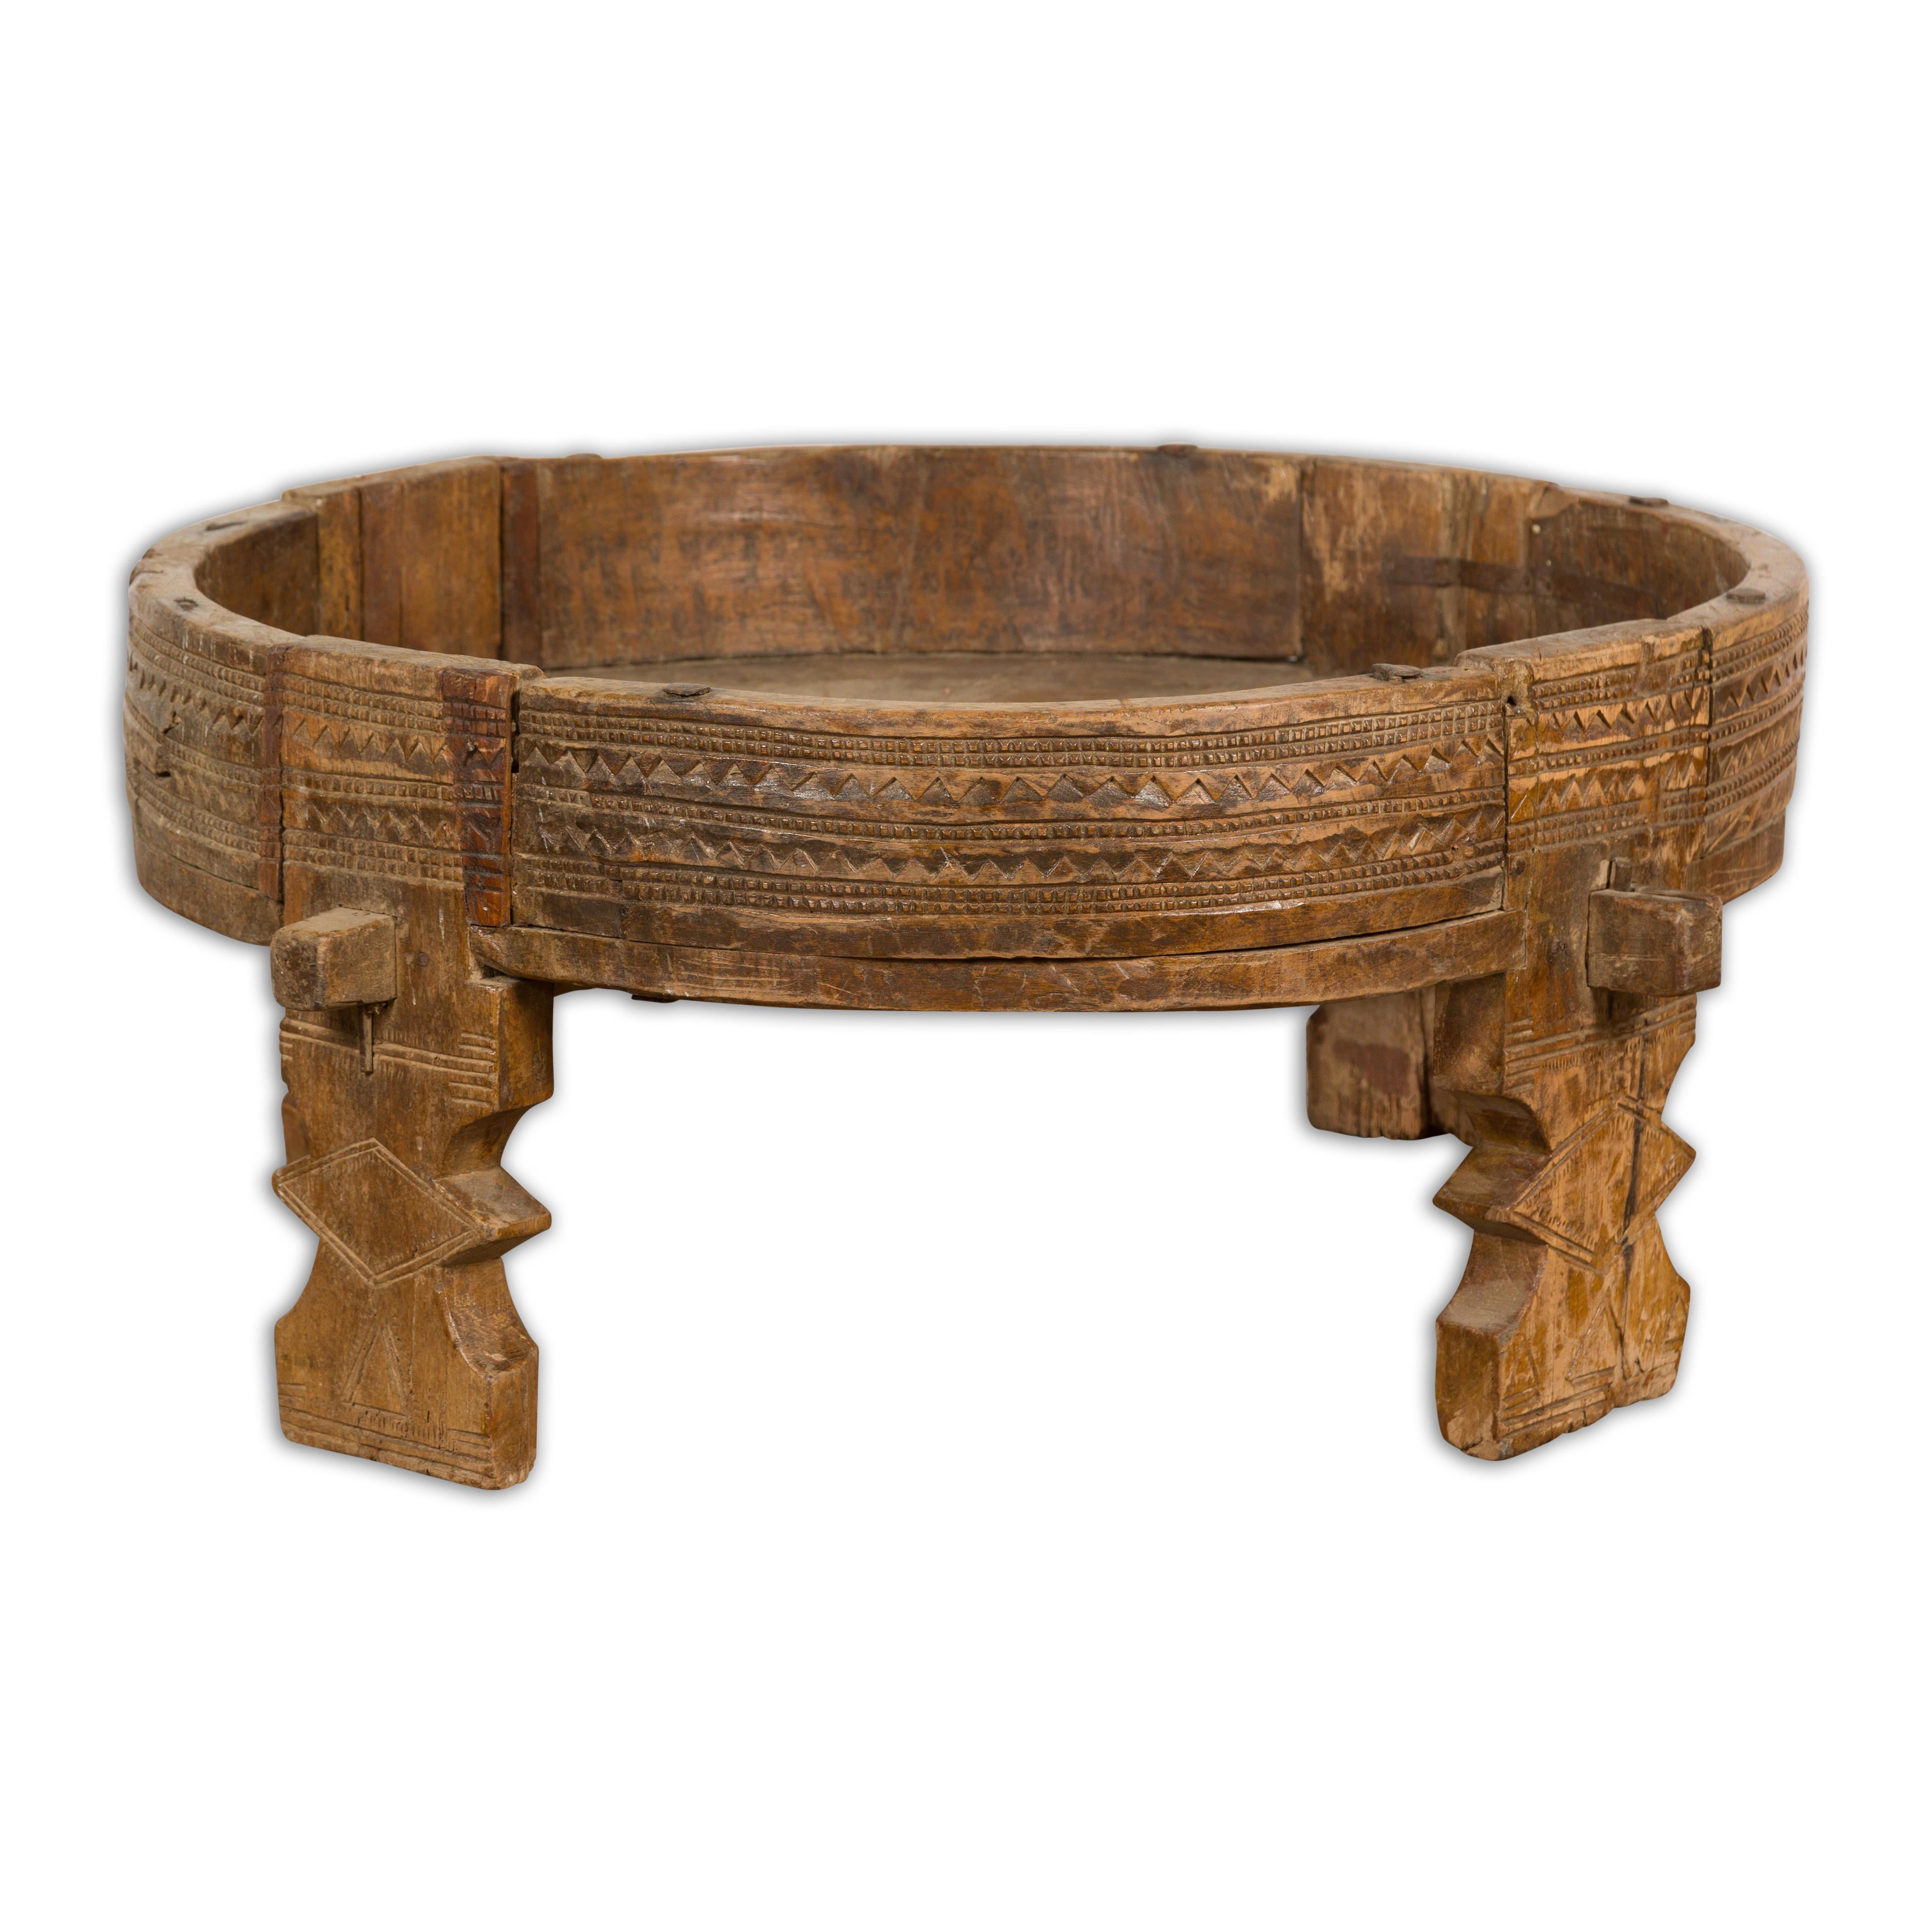 Tribal Indian 1920s Teak Chakki Grinding Table with Geometric Carved Motifs For Sale 9